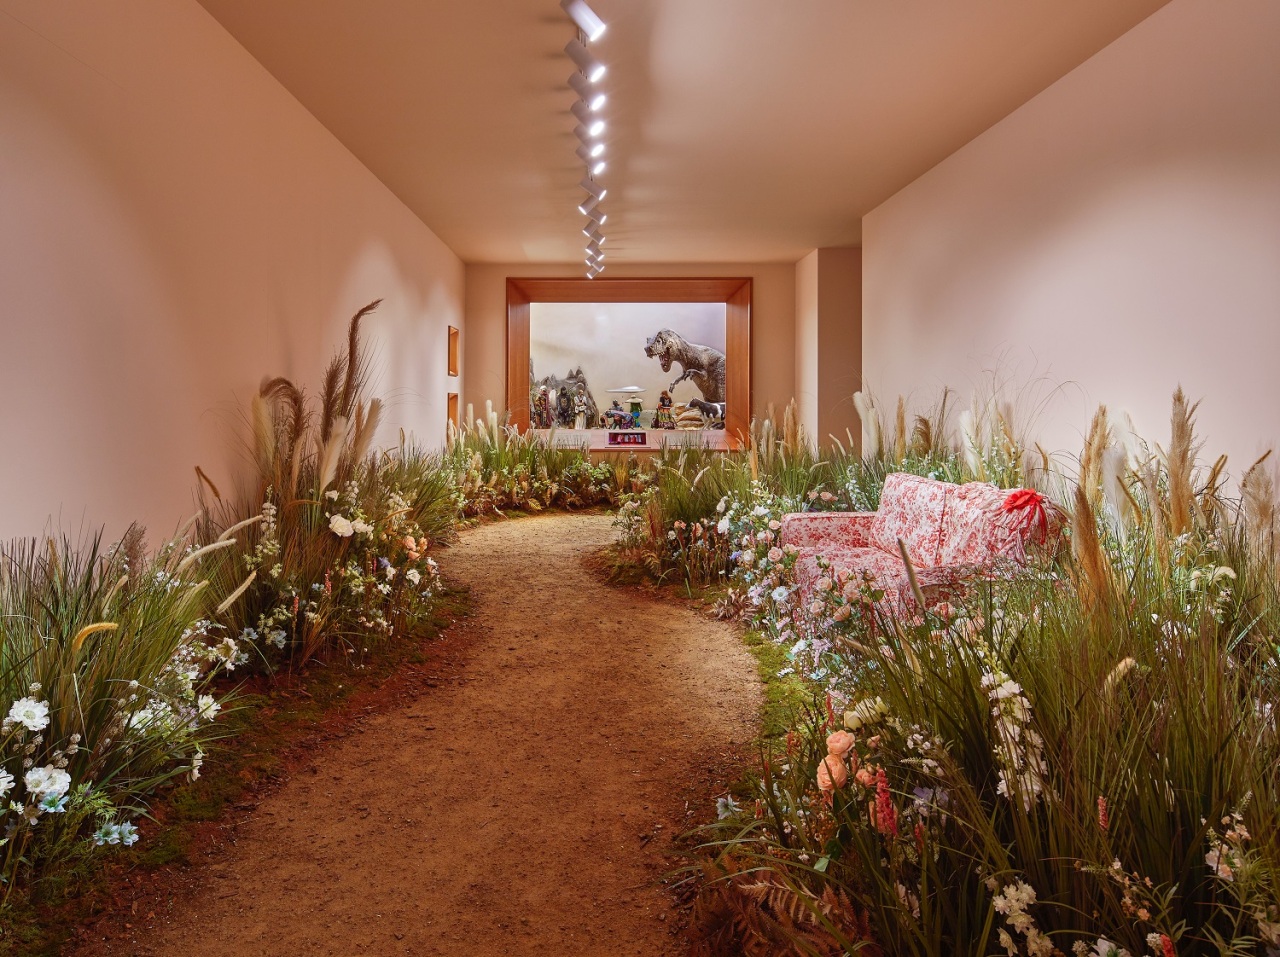 Installation view of “Gucci Garden Archetypes” at Dongdaemun Design Plaza (DDP) Design Museum in central Seoul (Gucci)